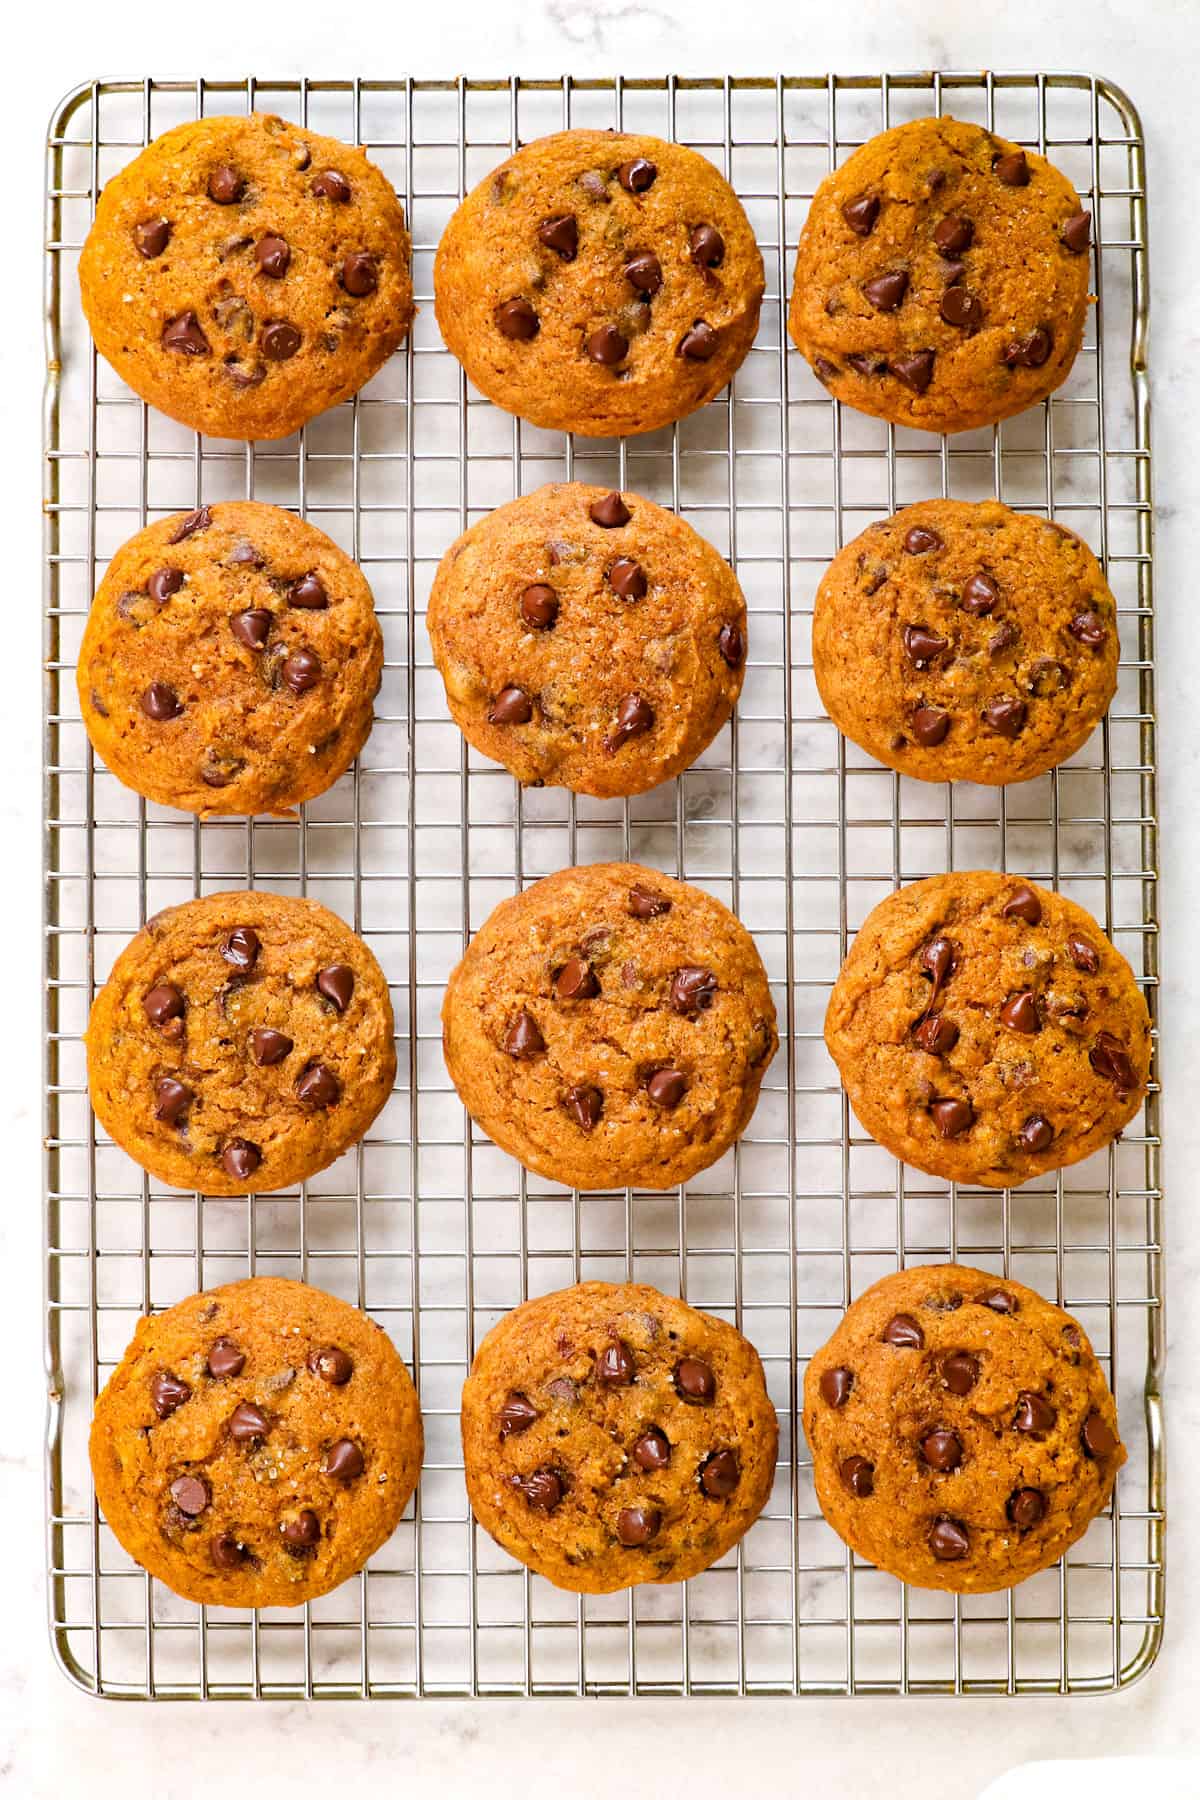 showing how to make pumpkin chocolate chip cookies by cooling pumpkin cookies on a wire rack